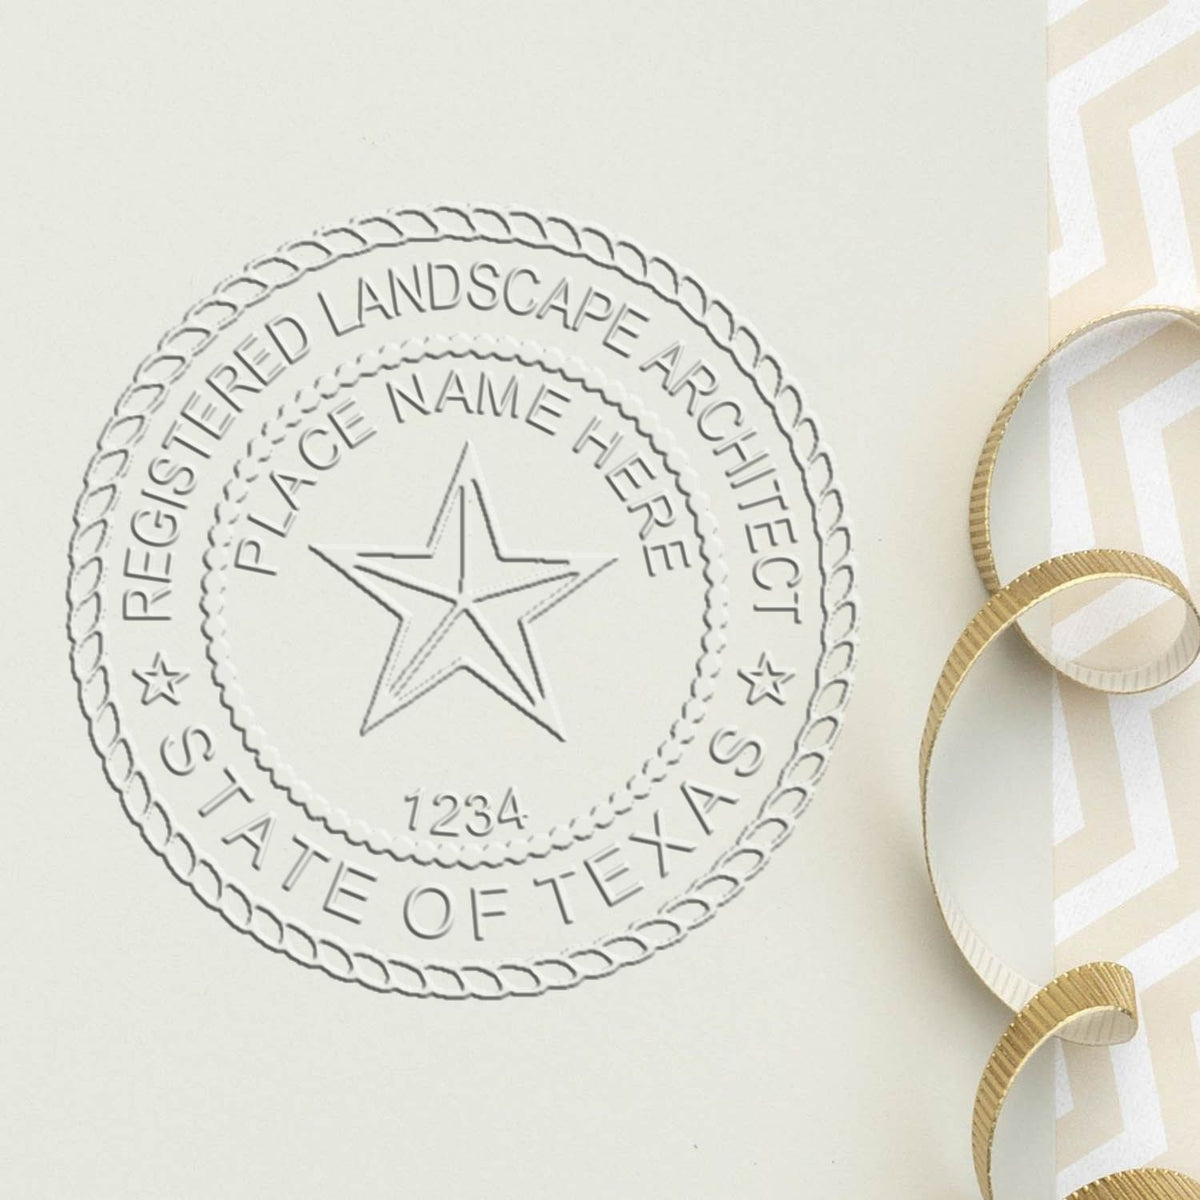 A stamped imprint of the Gift Texas Landscape Architect Seal in this stylish lifestyle photo, setting the tone for a unique and personalized product.